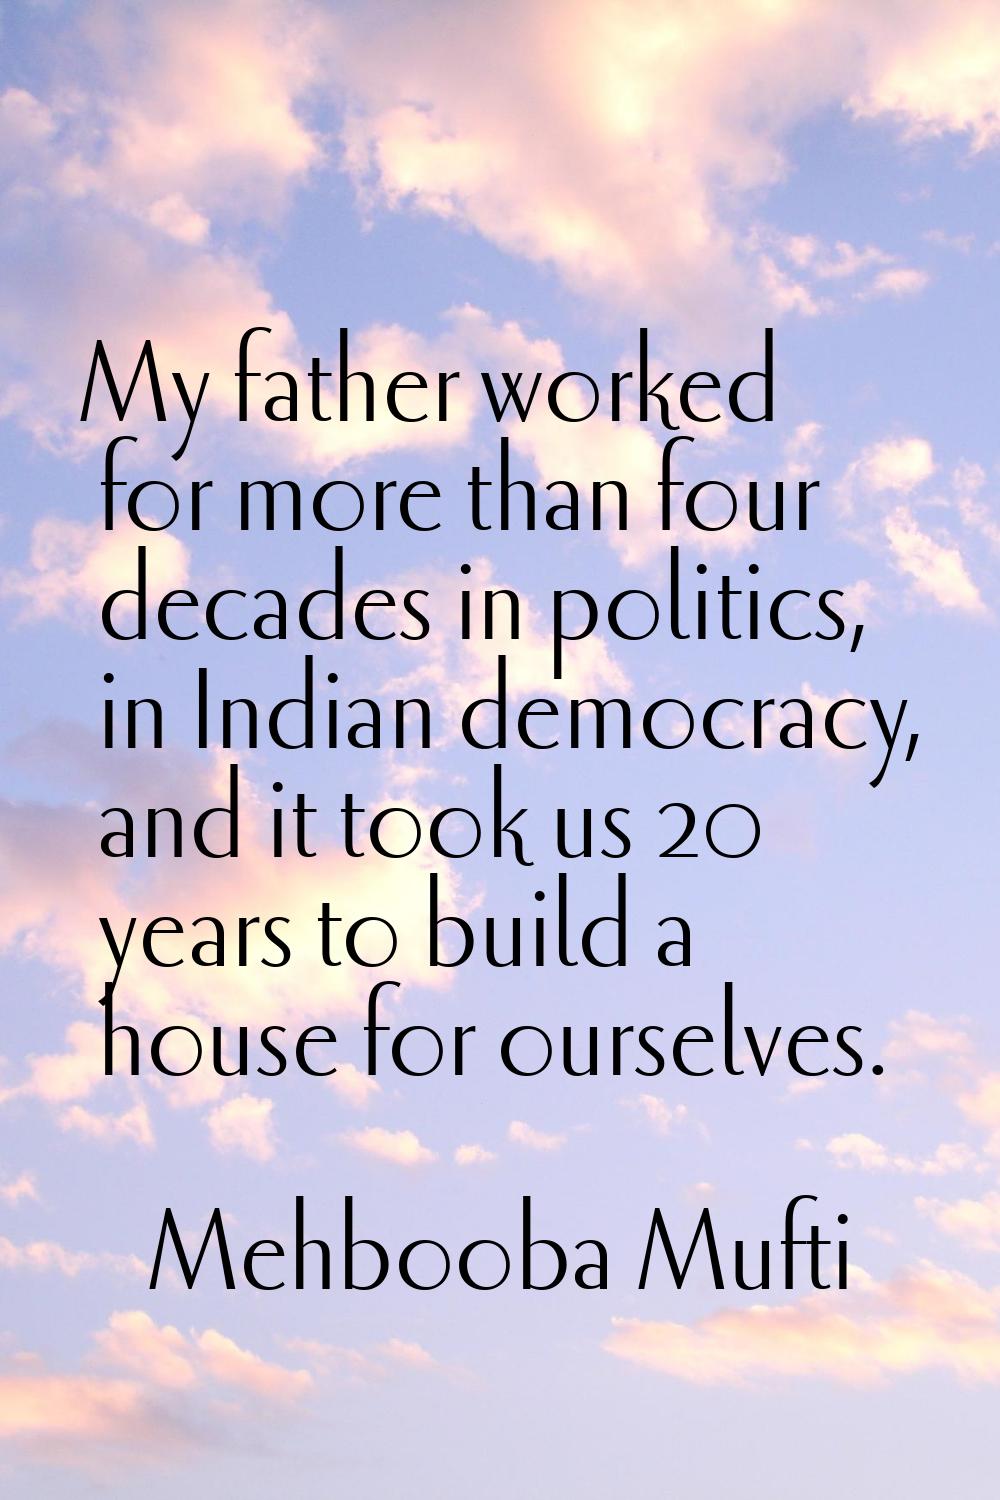 My father worked for more than four decades in politics, in Indian democracy, and it took us 20 yea